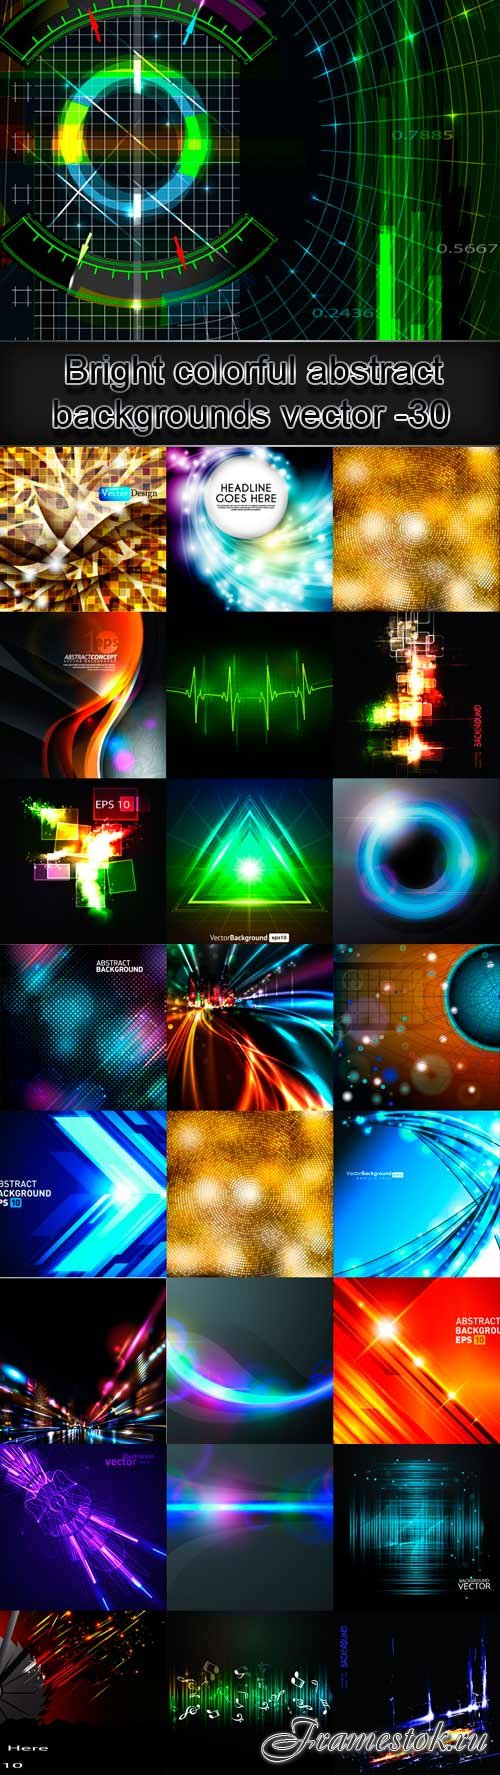 Bright colorful abstract backgrounds vector -30